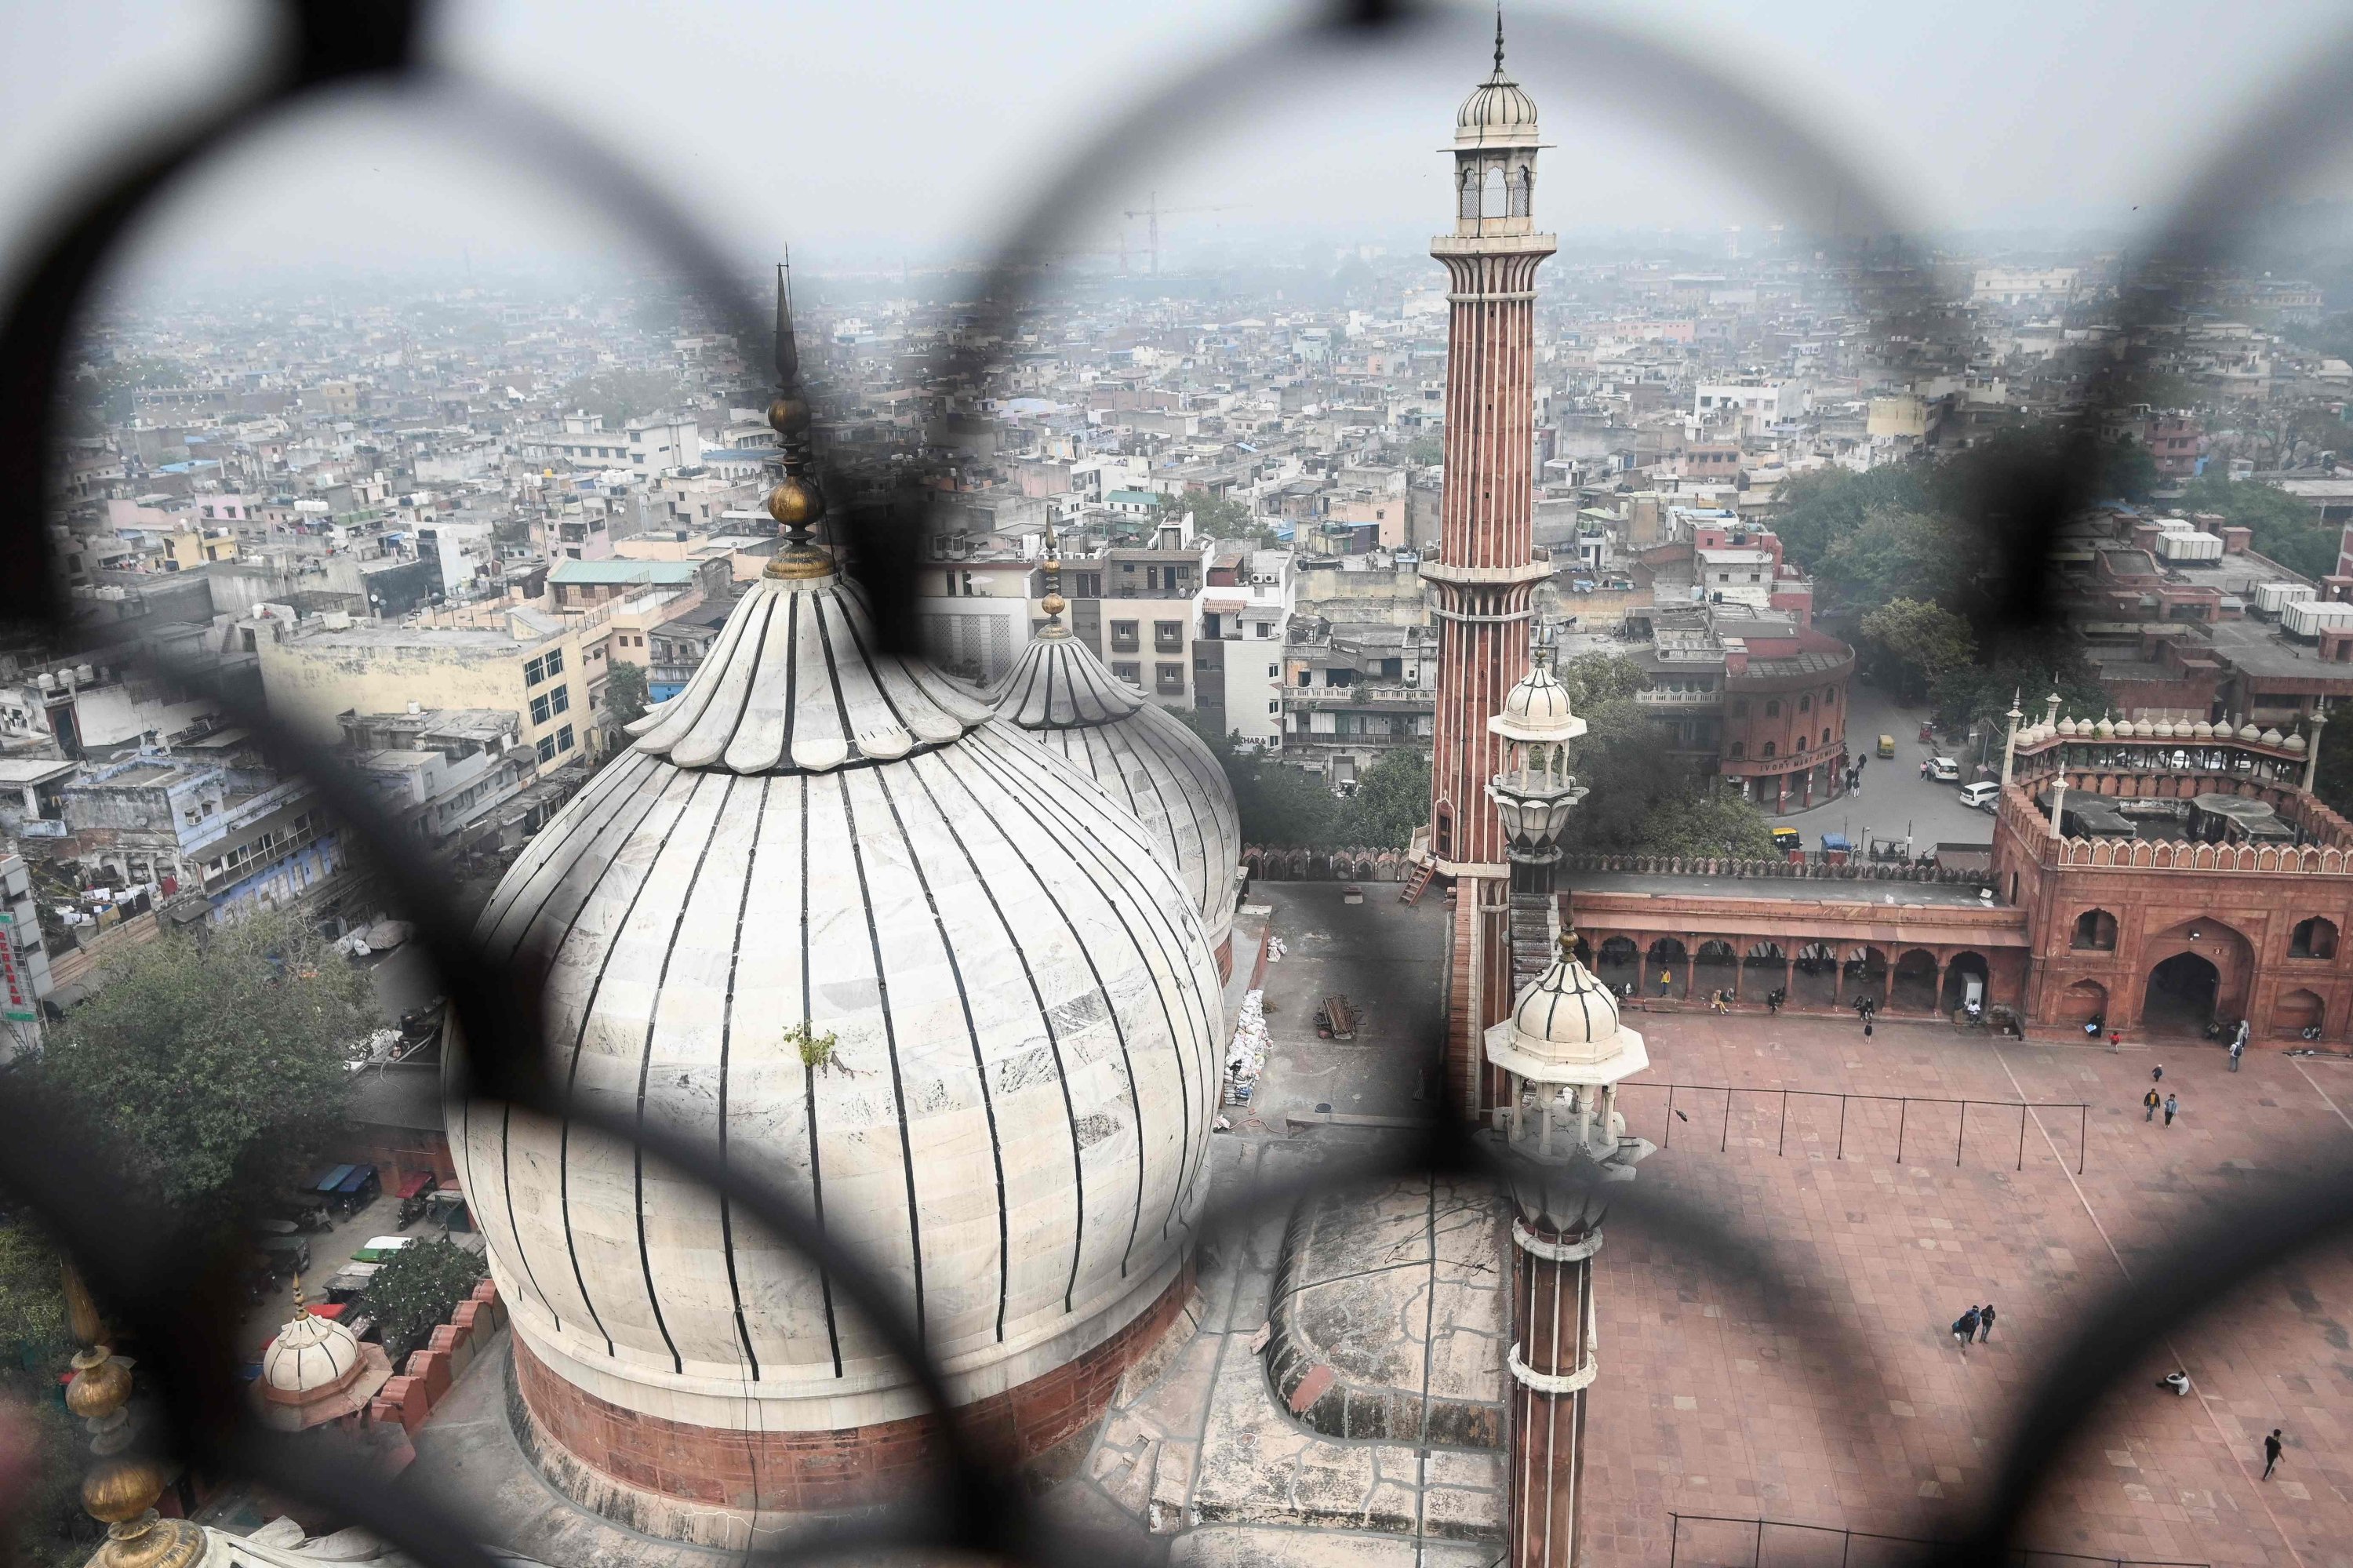 A general view of the walled city pictured amid smoggy conditions from a tower of the Jama Masjid mosque in the old quarter of Delhi, India, Dec. 5, 2021. (AFP Photo)